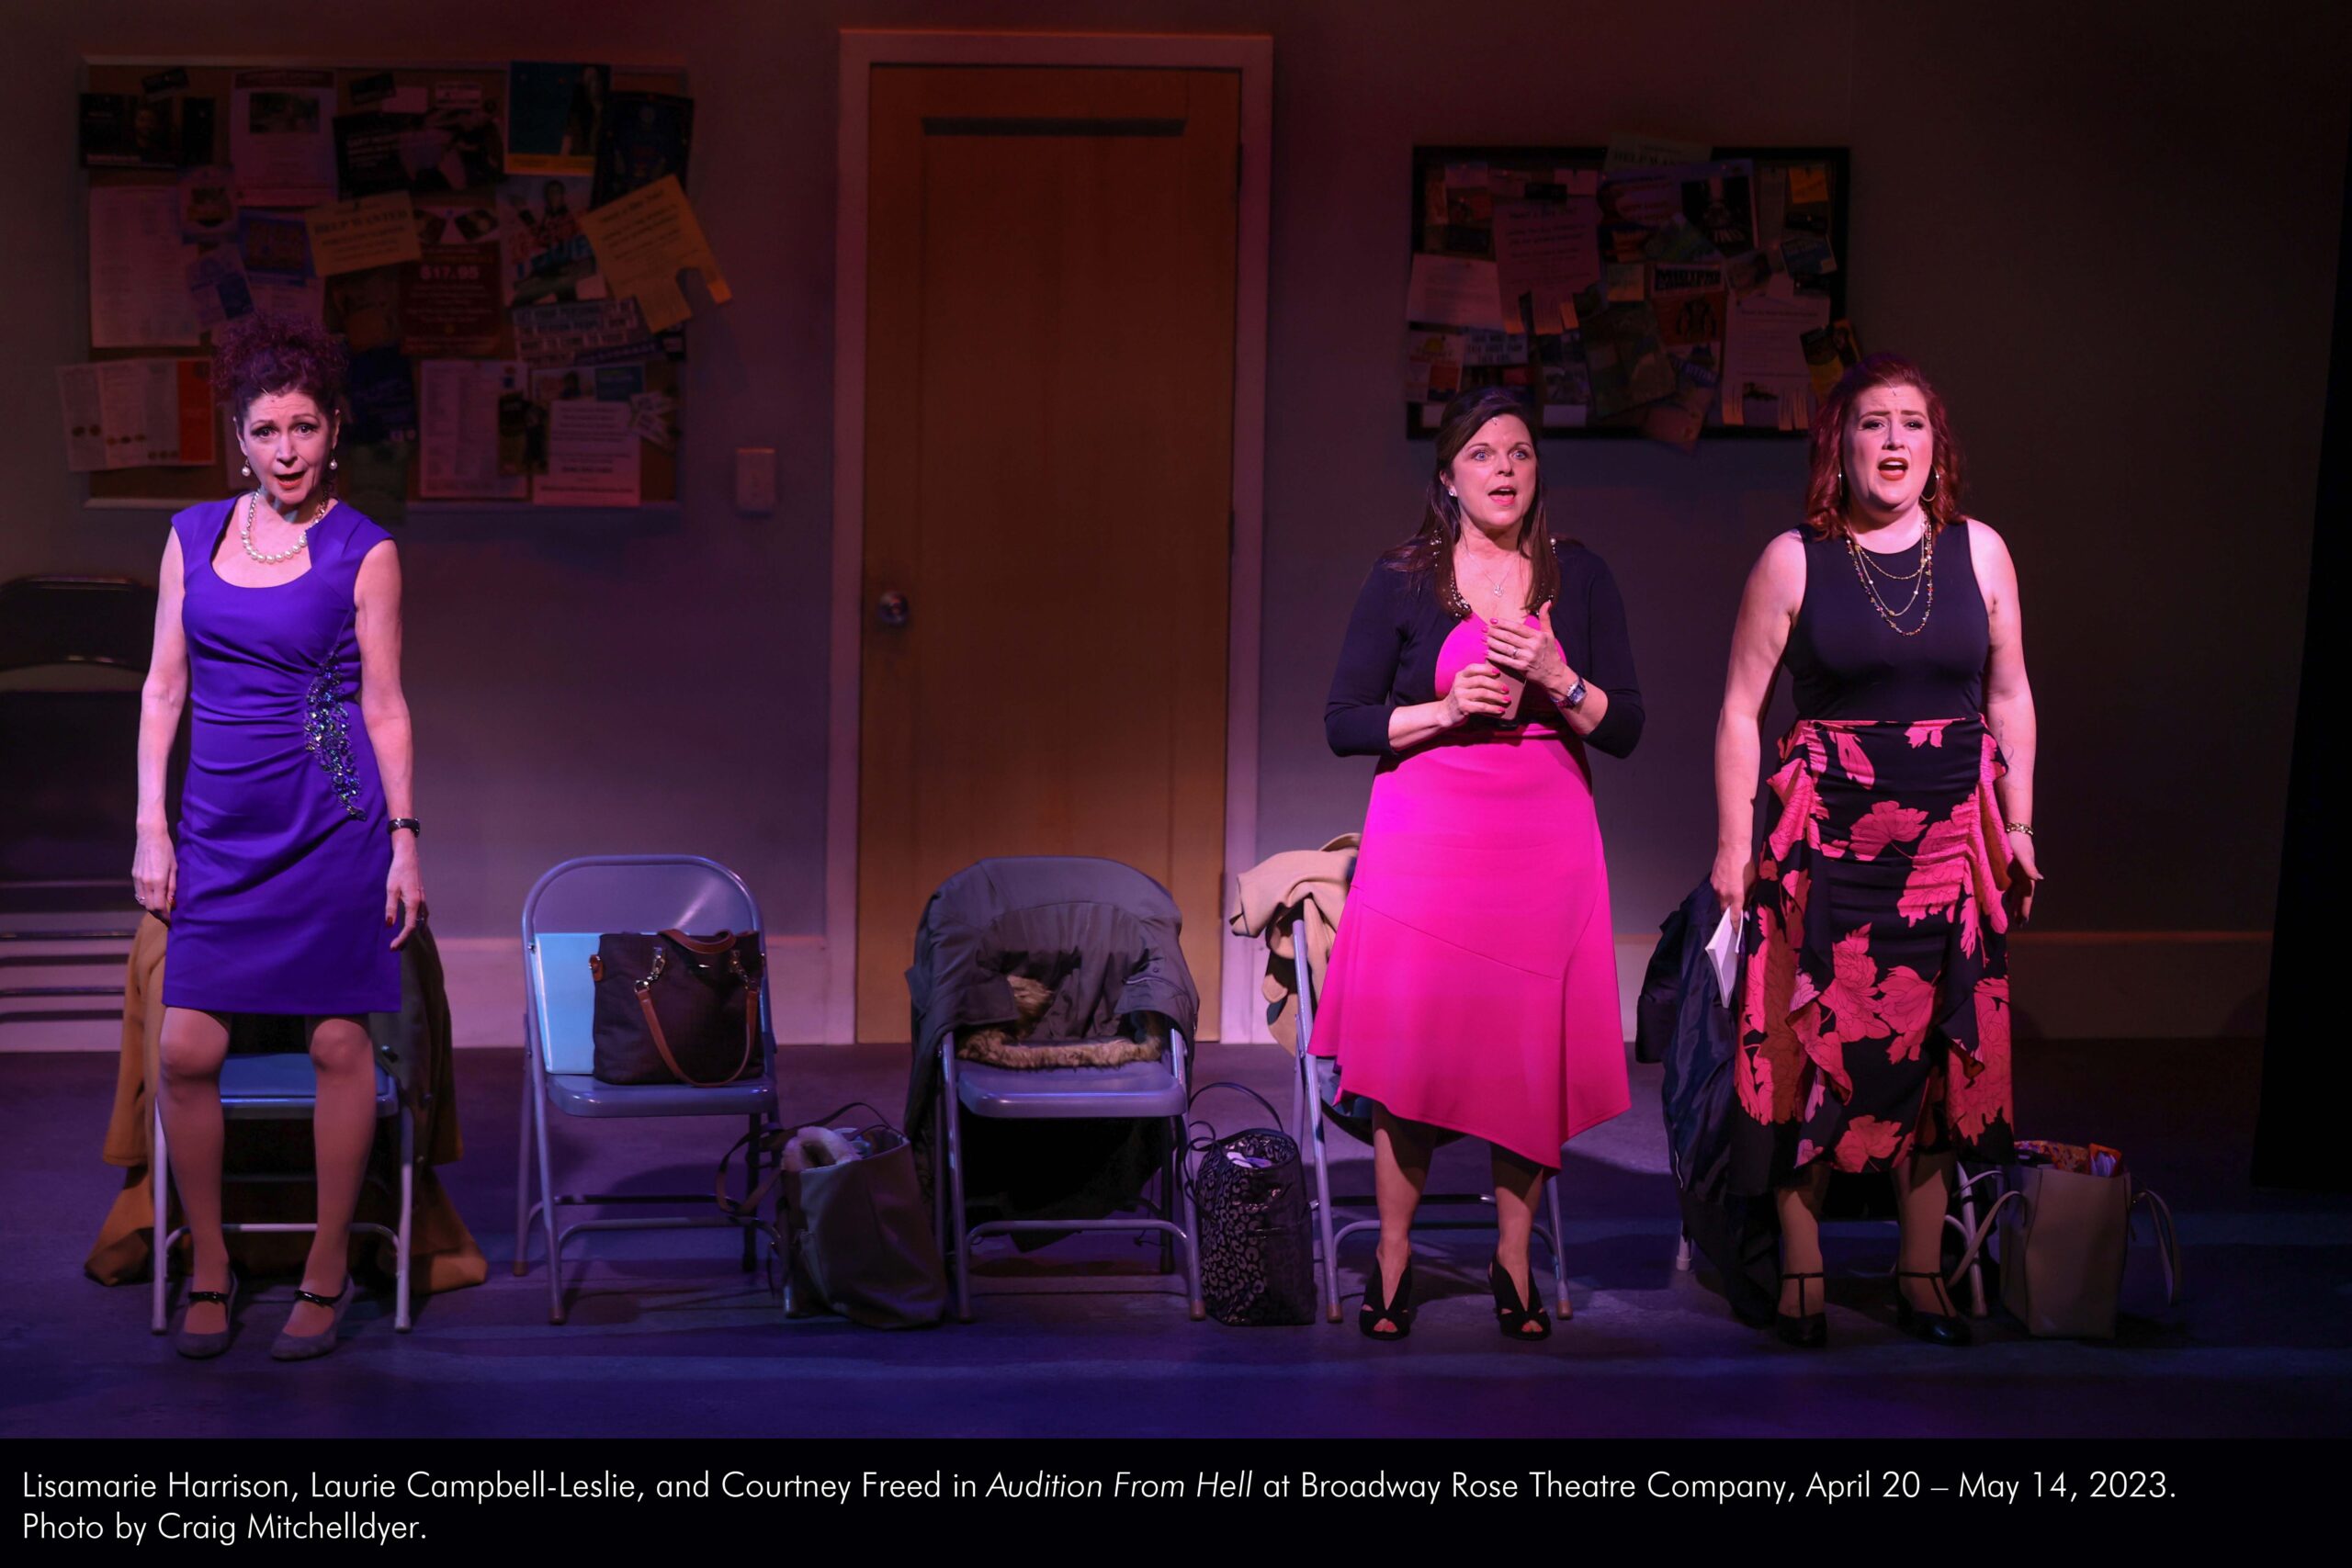 Lisamarie Harrison, Laurie Campbell-Leslie, and Courtney Freed in Audition From Hell at Broadway Rose Theatre Company. April 20 through May 14, 2023. Photo by Craig Mitchelldyer